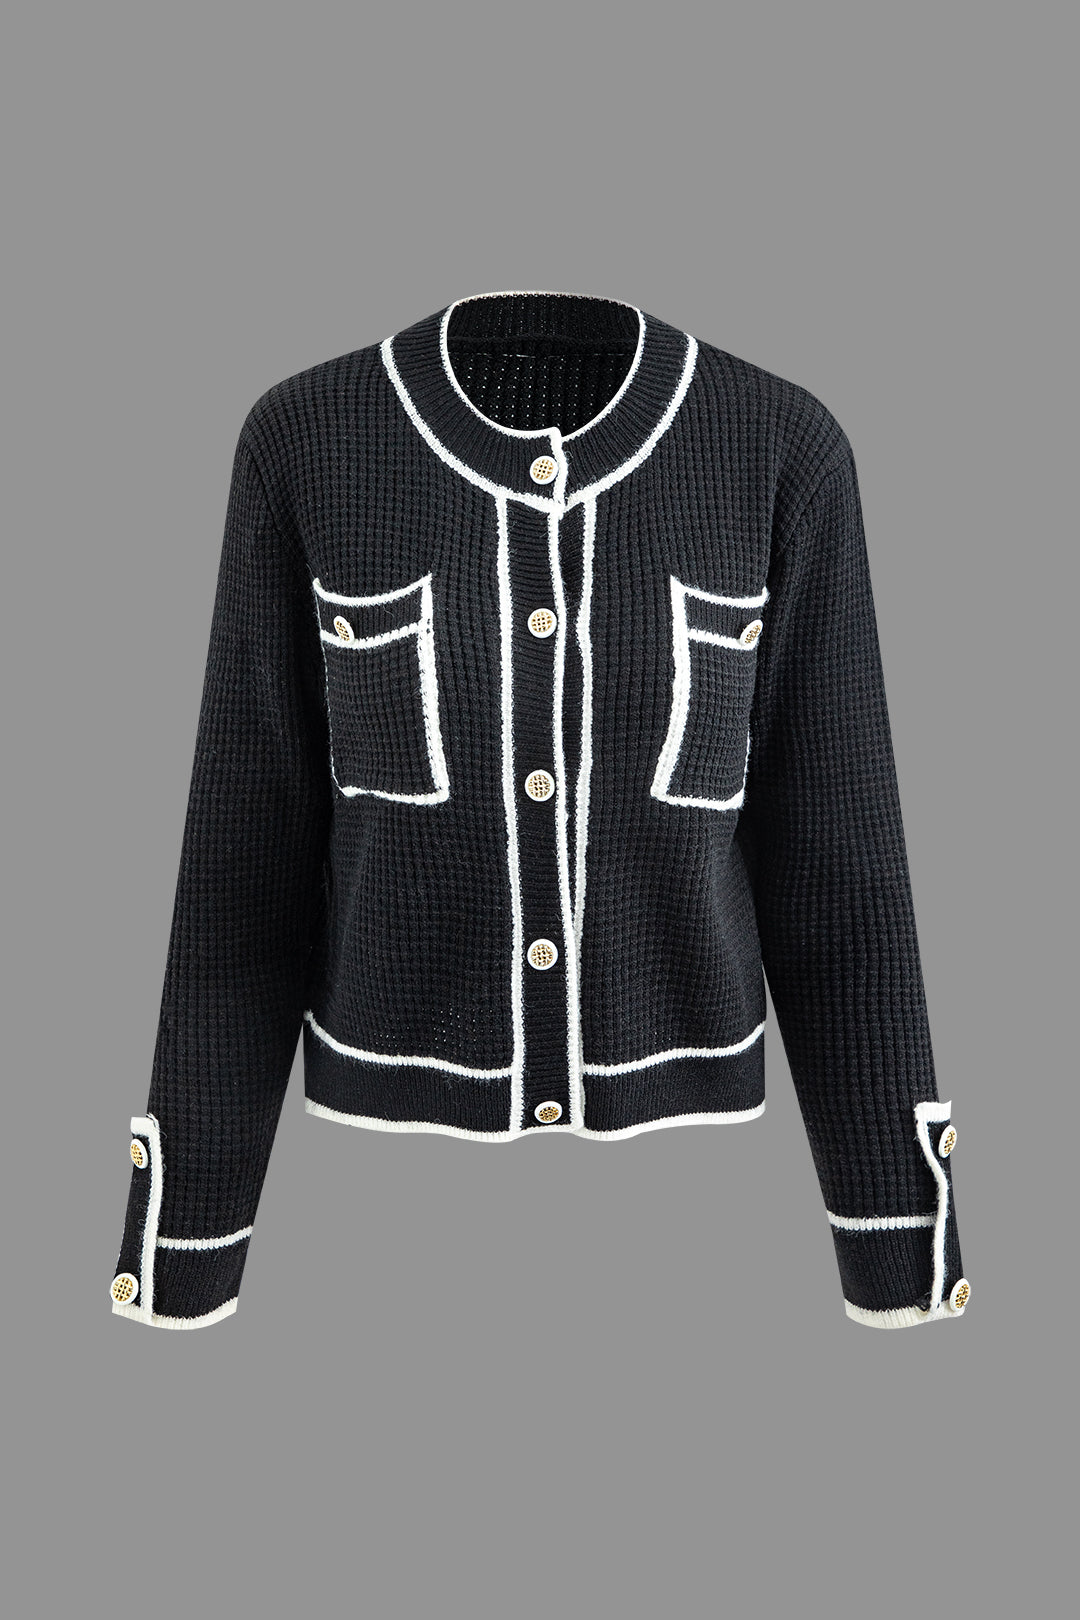 Contrast Button Up Long Sleeve Knit Cardigan